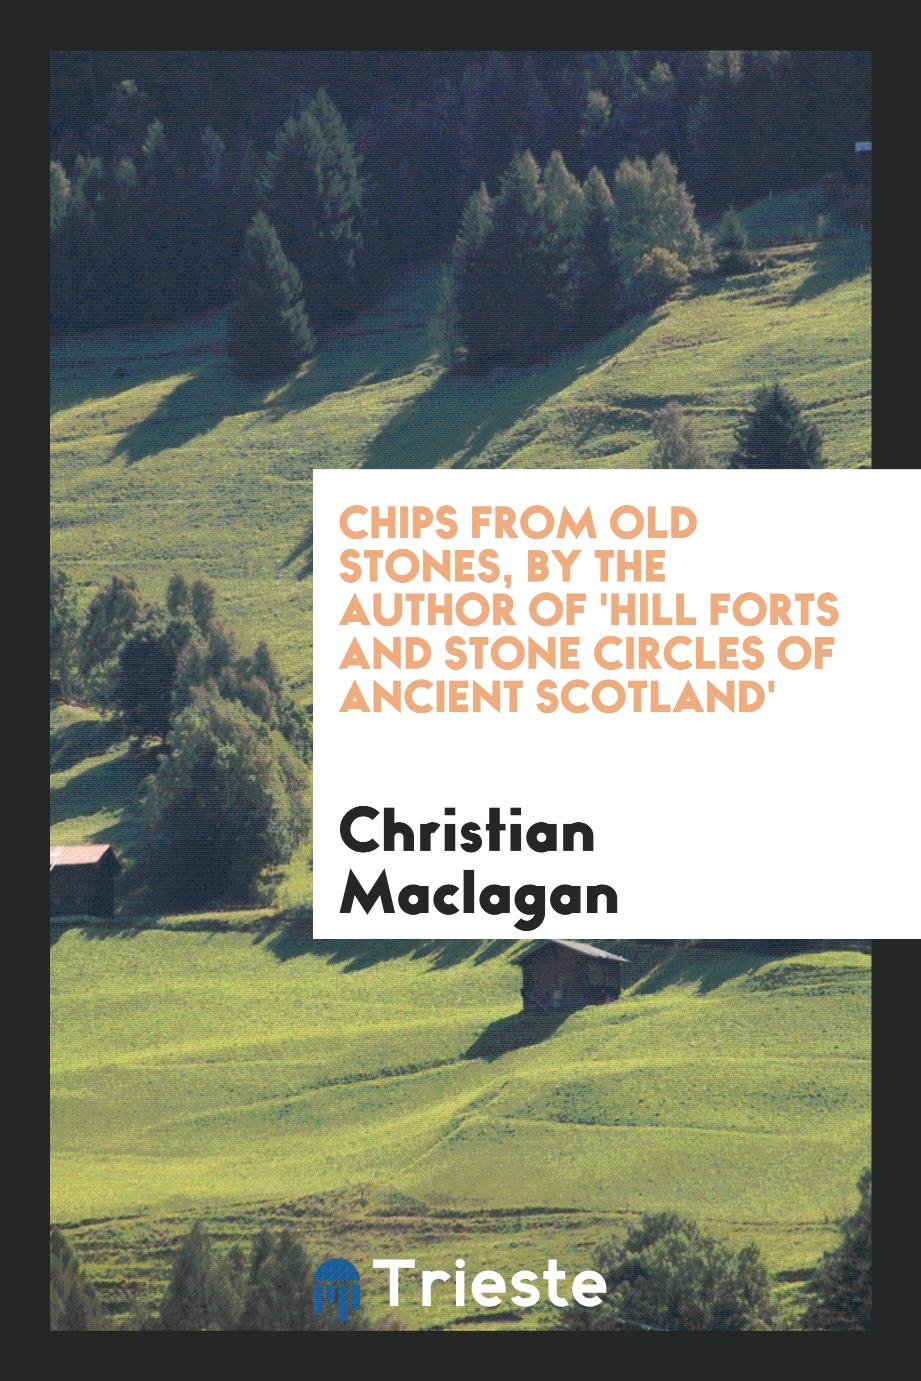 Chips from old stones, by the author of 'Hill forts and stone circles of ancient Scotland'